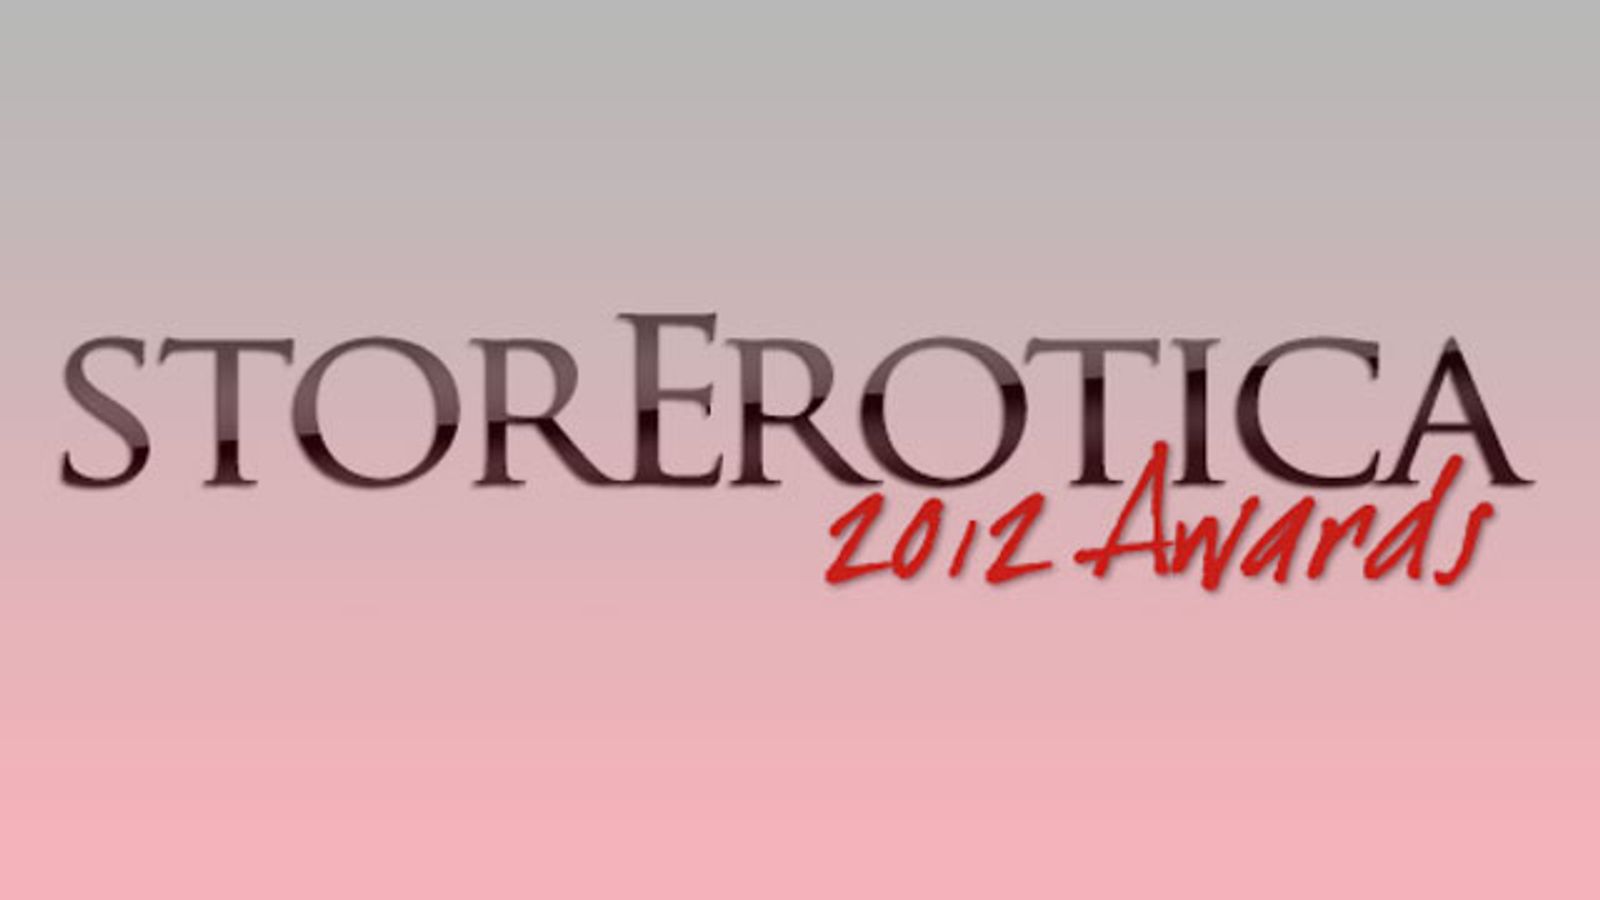 2012 StorErotica Award WInners Announced During ANME